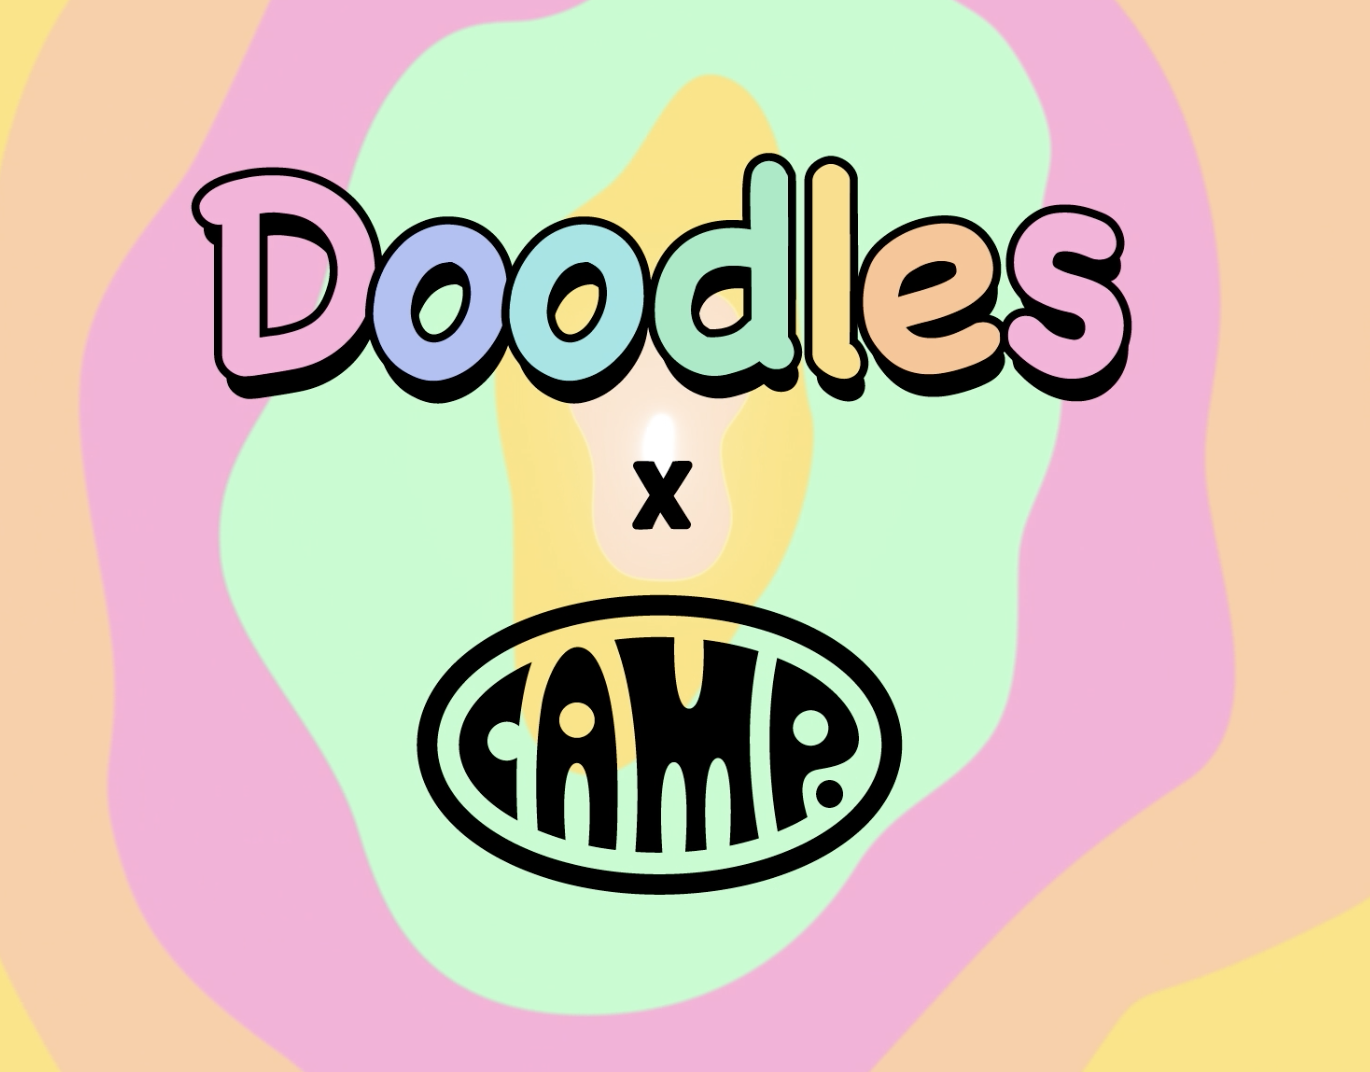 Doodles collaborates with Camp to double down on immersive experiences